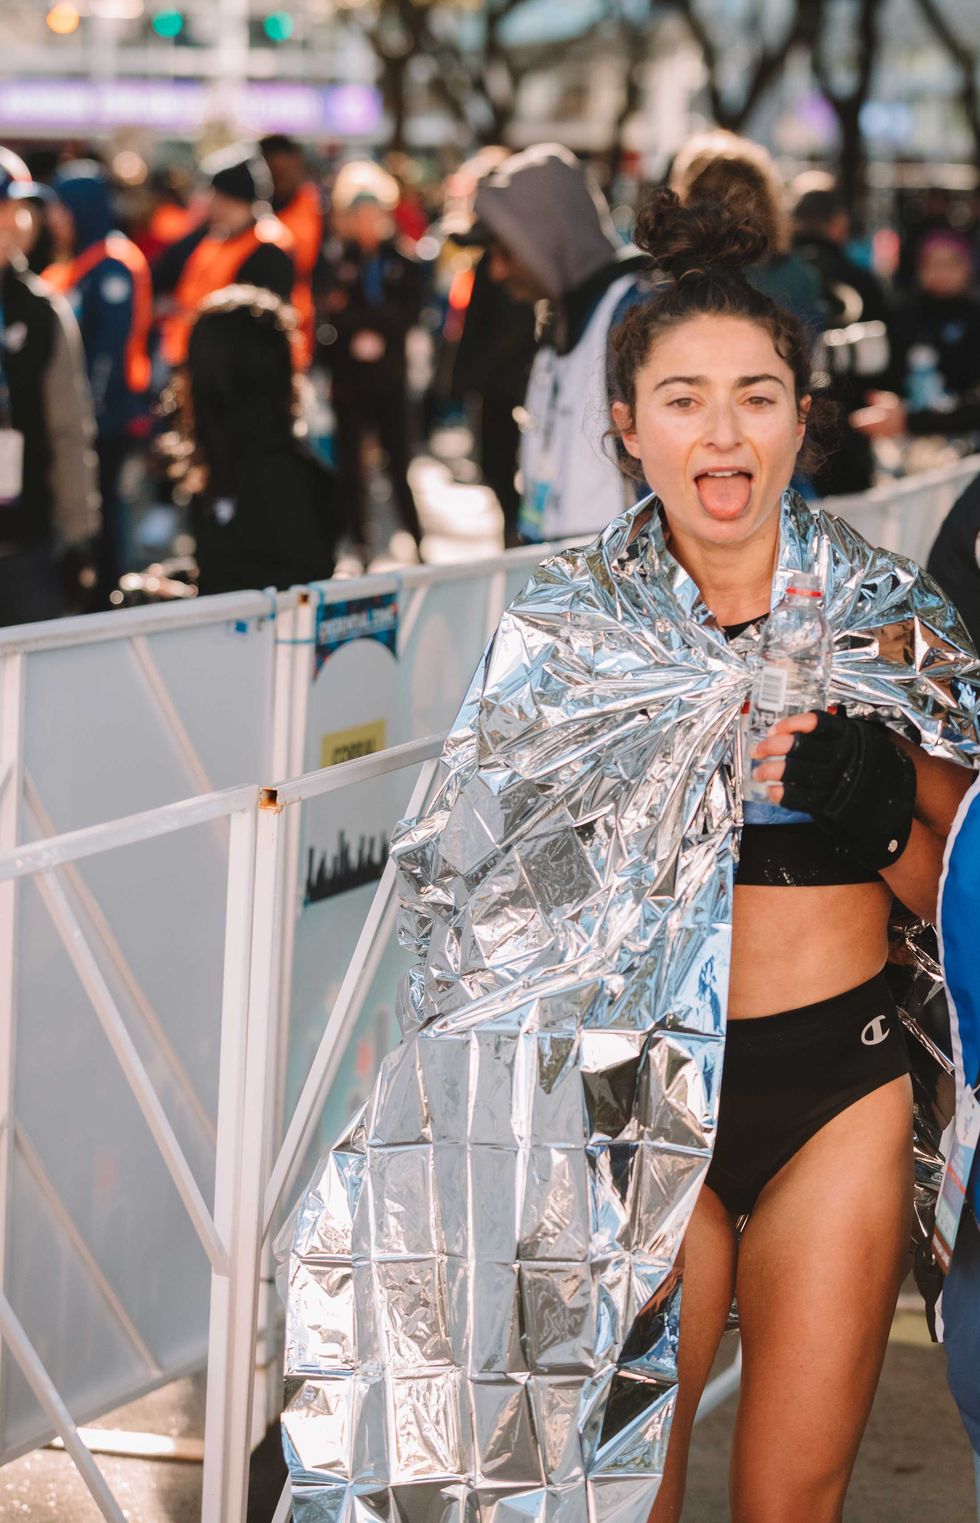 Alexi Pappas after her 9-minute personal best of 2:34:26 at the Houston Marathon on Sunday, January 19, 2020.